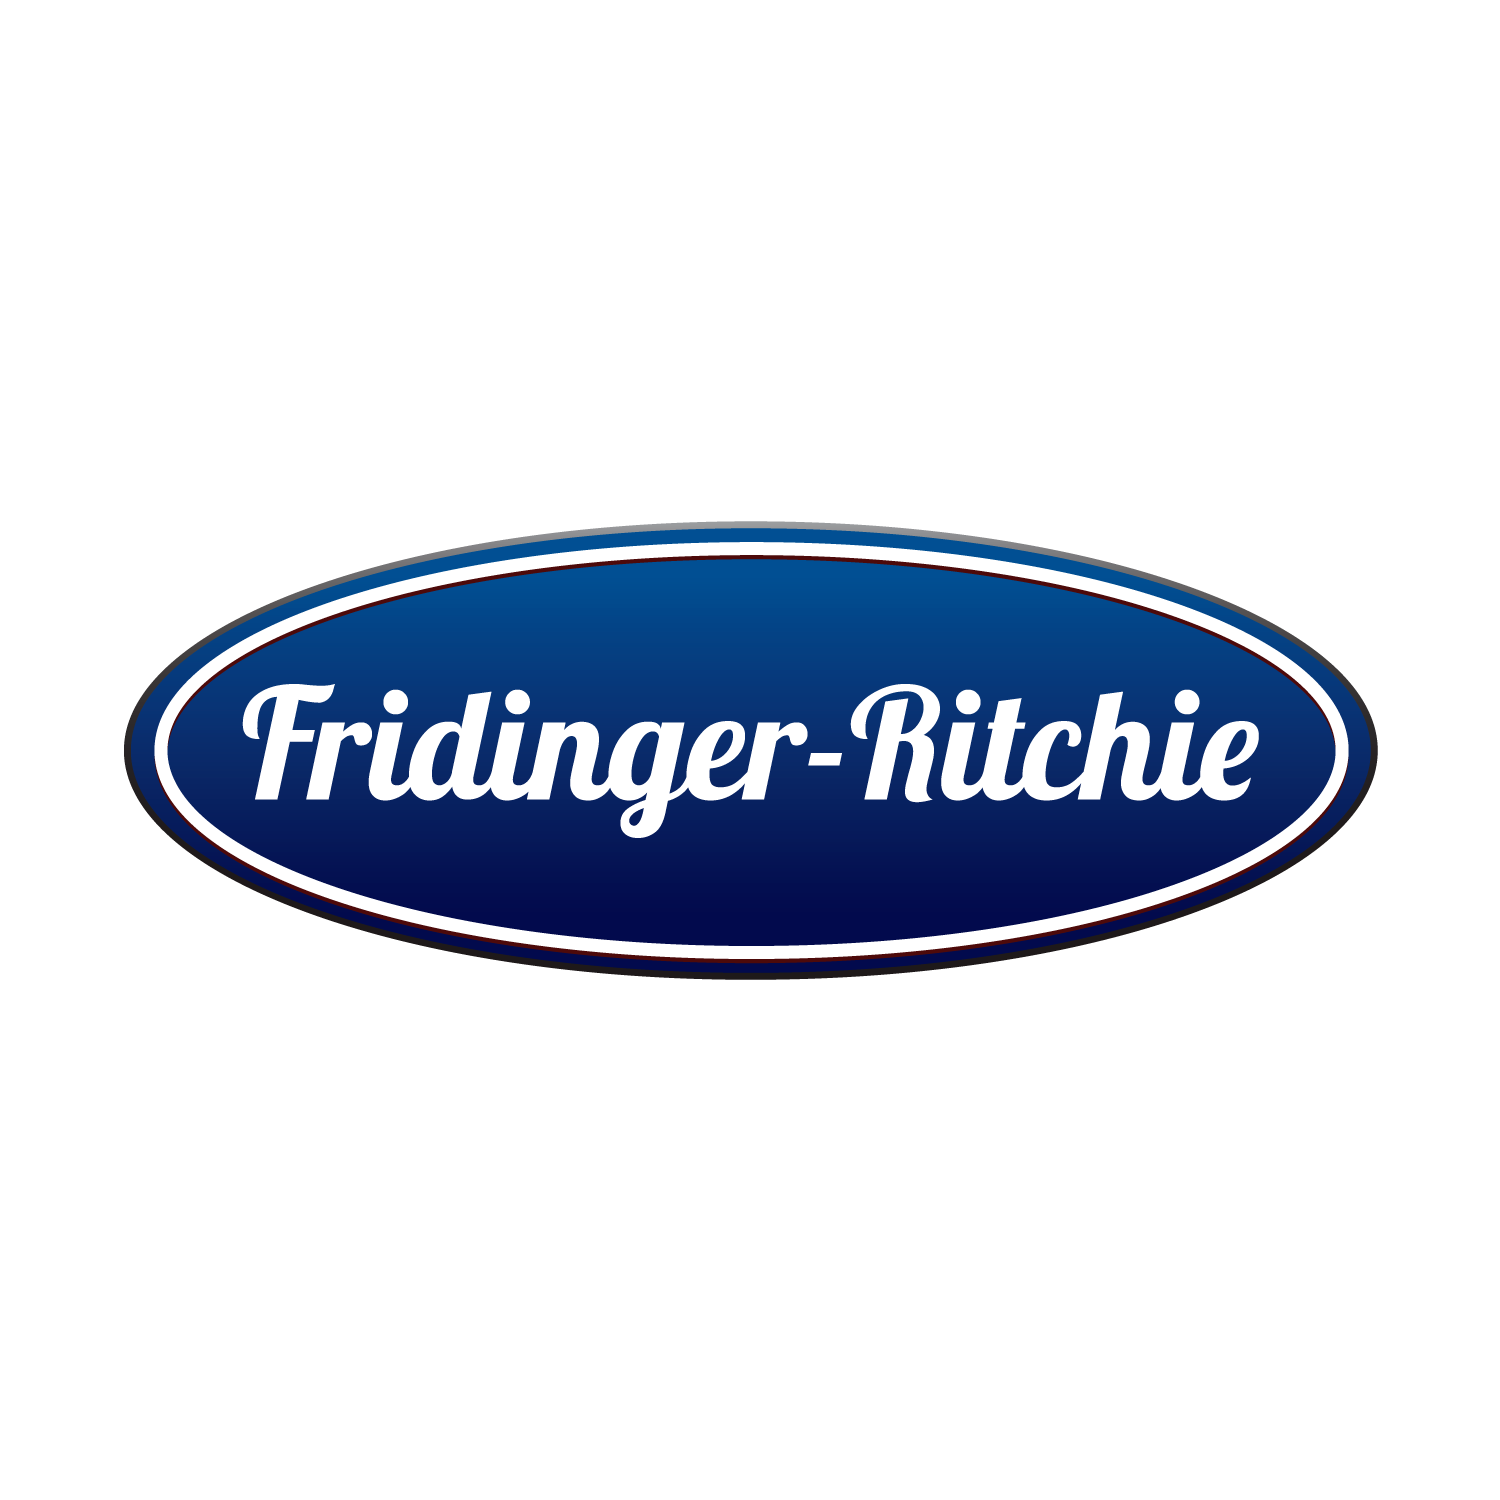 Fridinger-Ritchie Co Inc - Hagerstown, MD 21740 - (301)739-6111 | ShowMeLocal.com